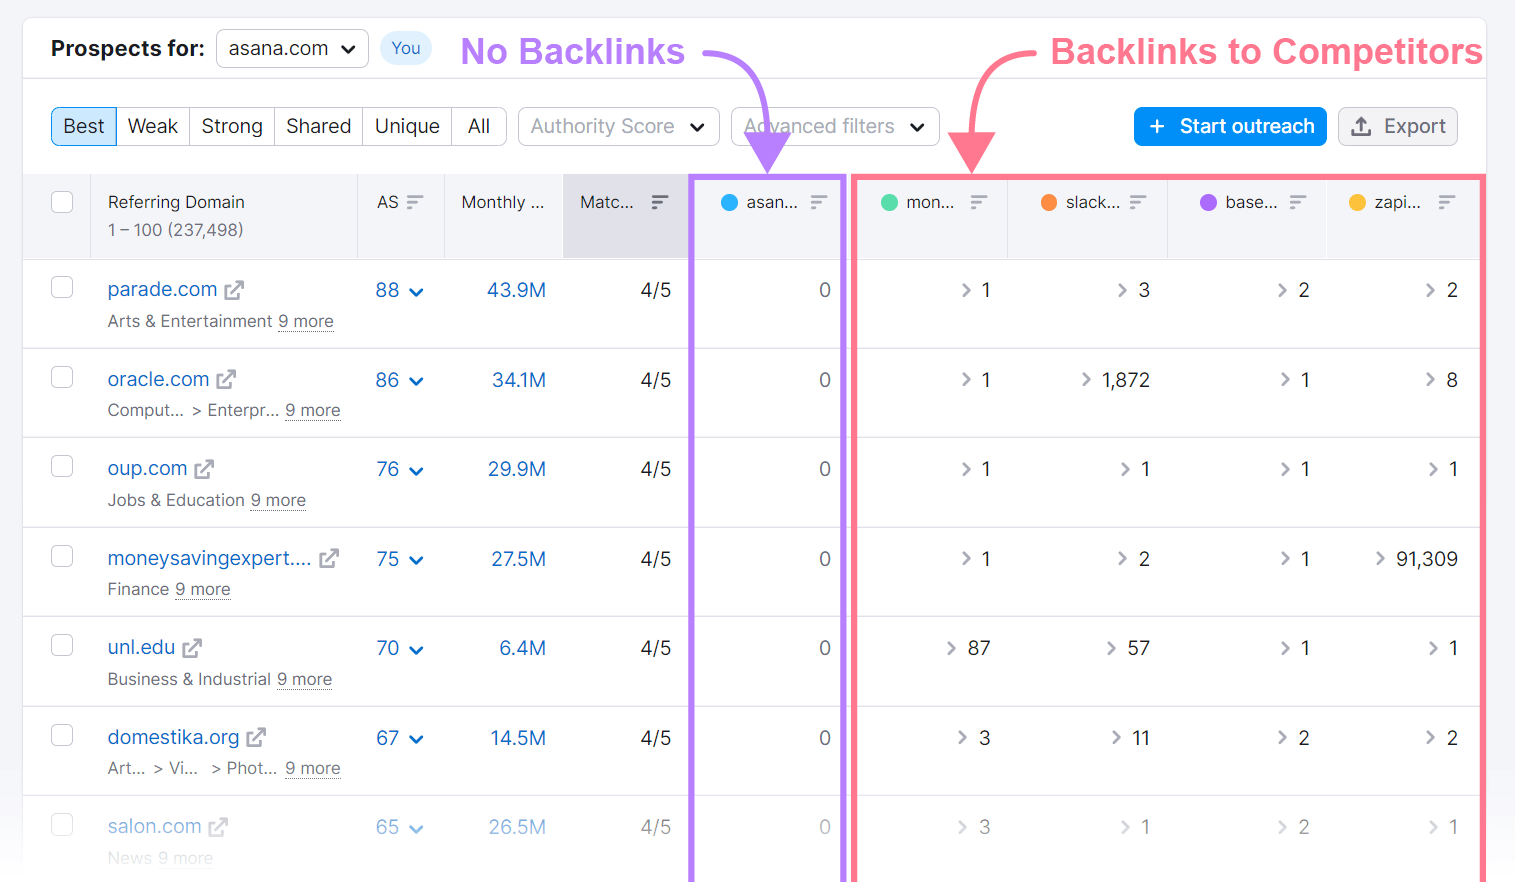 Backlink Gap prospects table, with the ones with nary  backlinks and backlinks to competitors highlighted